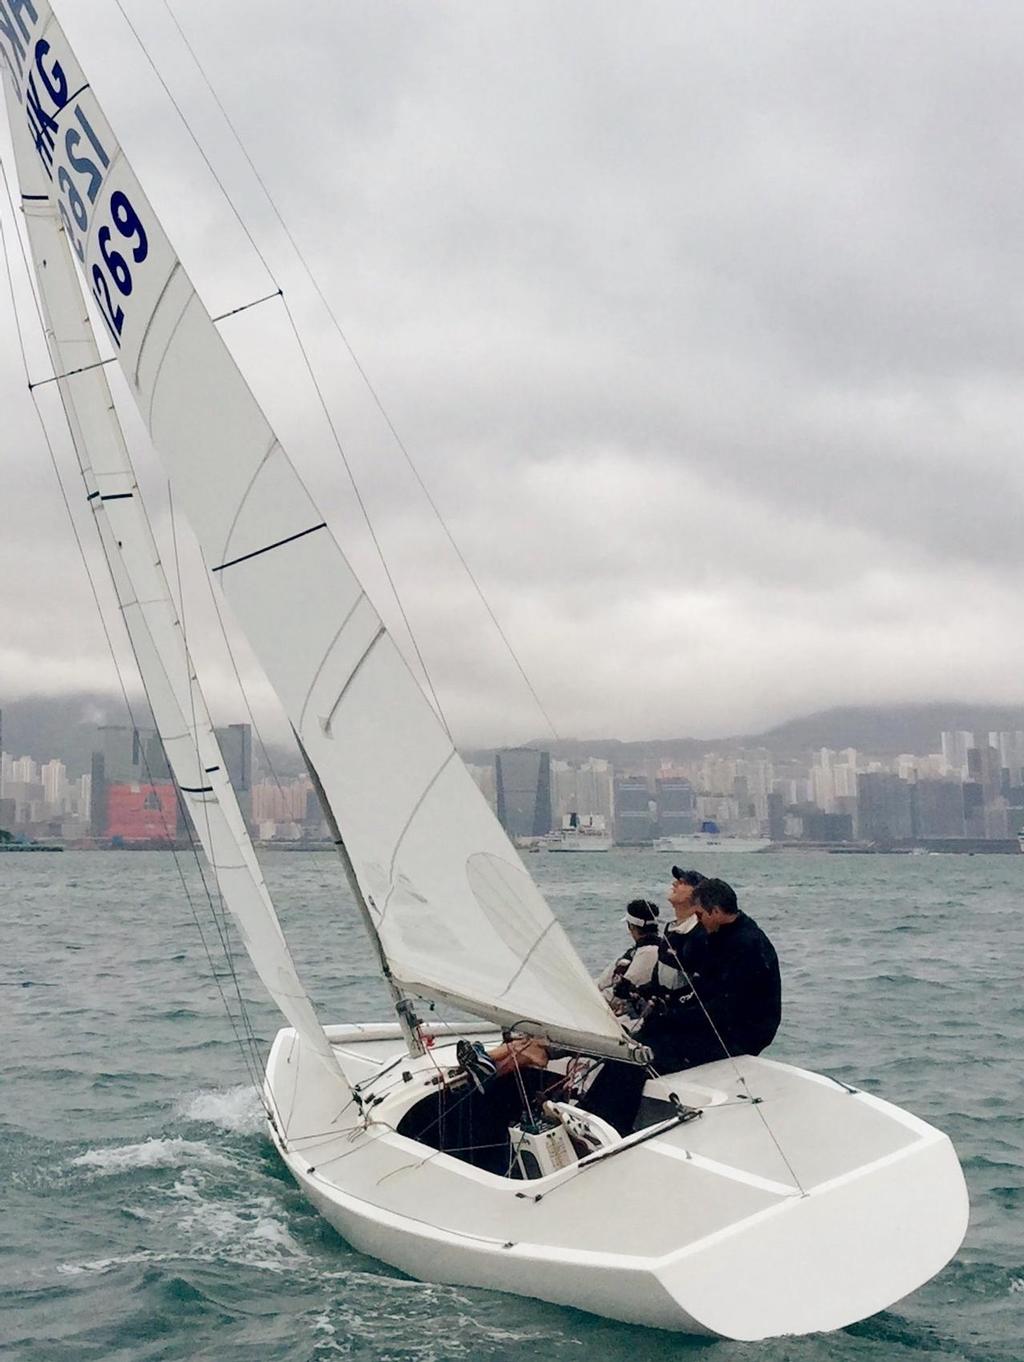 Tracey_Johnstone_Etchells Winters. Greg Farrell and team training off Royal Hong Kong Yacht Club. Credit contributed. © Tracey Johnstone